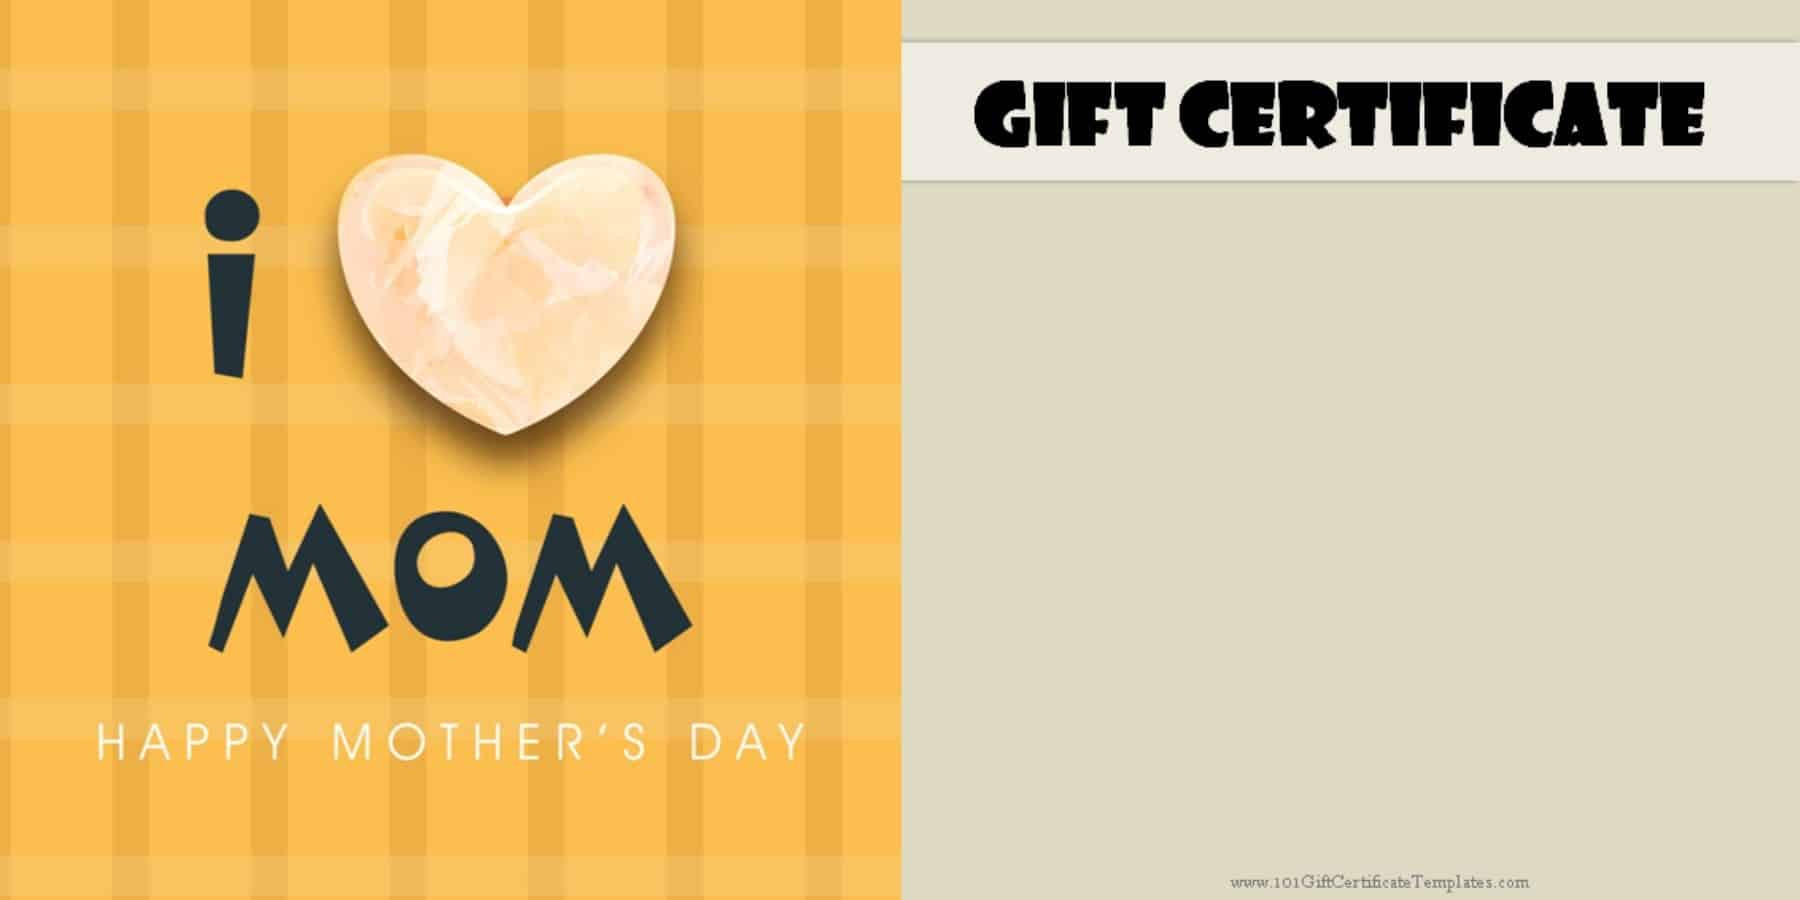 Mother's Day Gift Certificate Template Free Download
 Mother s Day Gift Certificate Templates